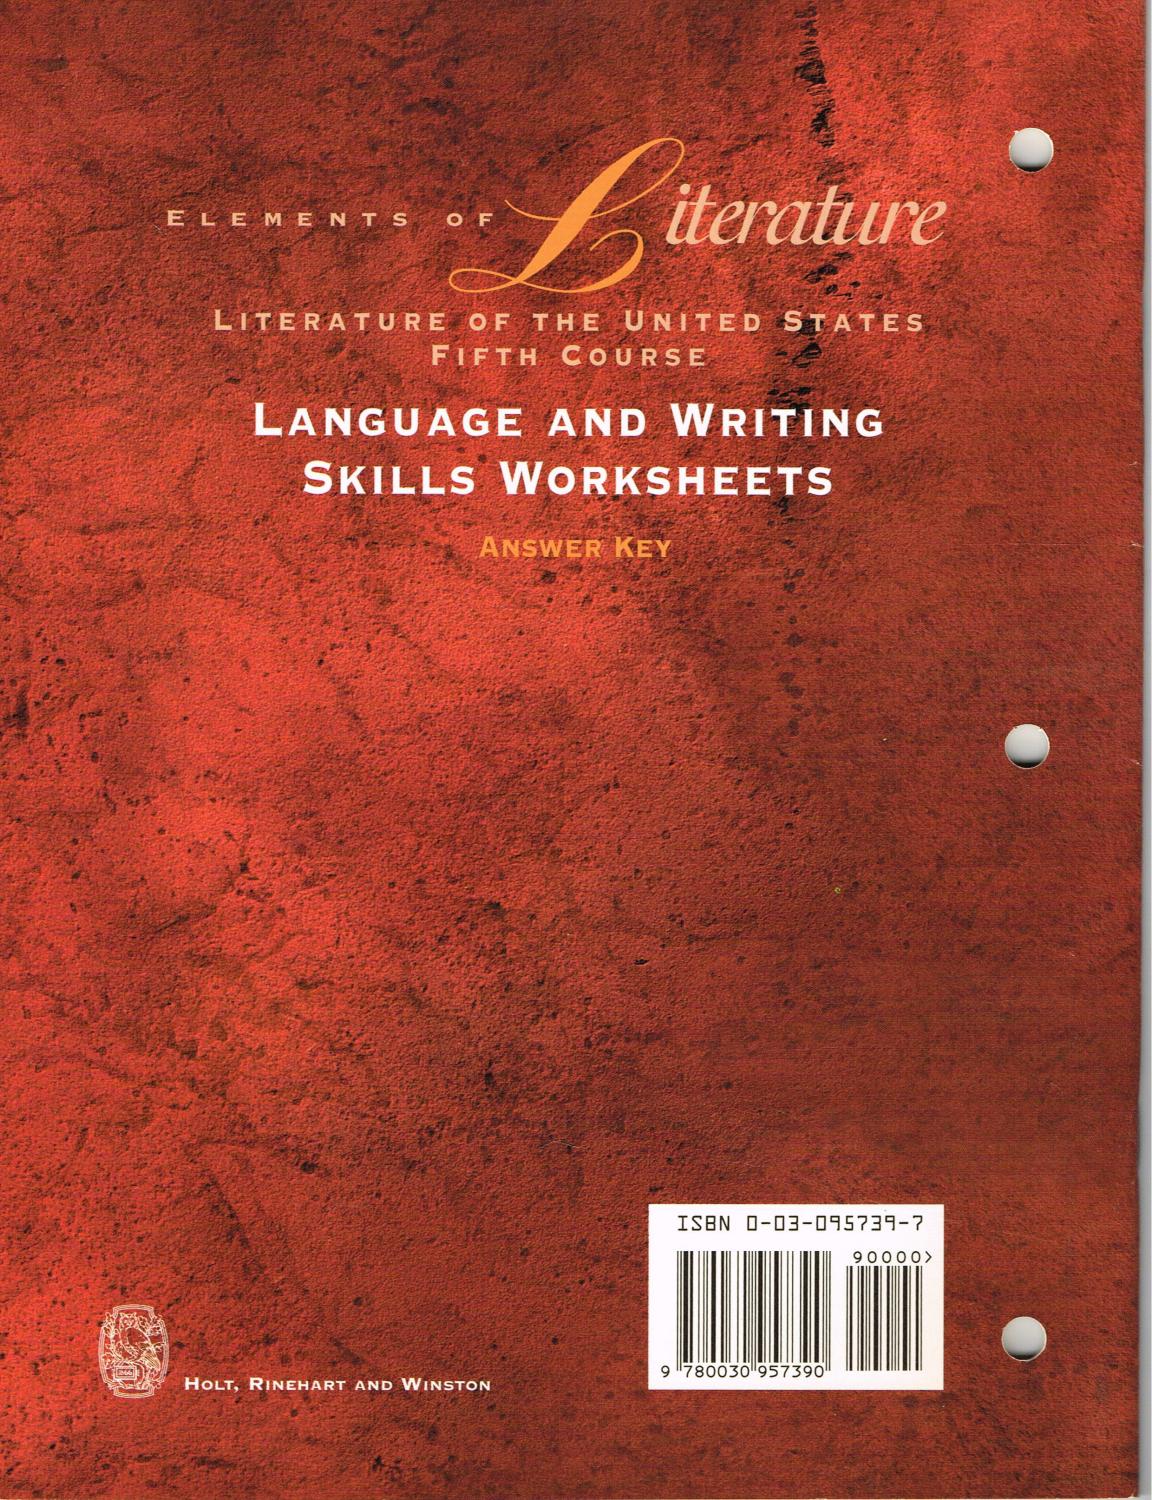 ELEMENTS OF LITERATURE Fifth Course, Literature of The United States